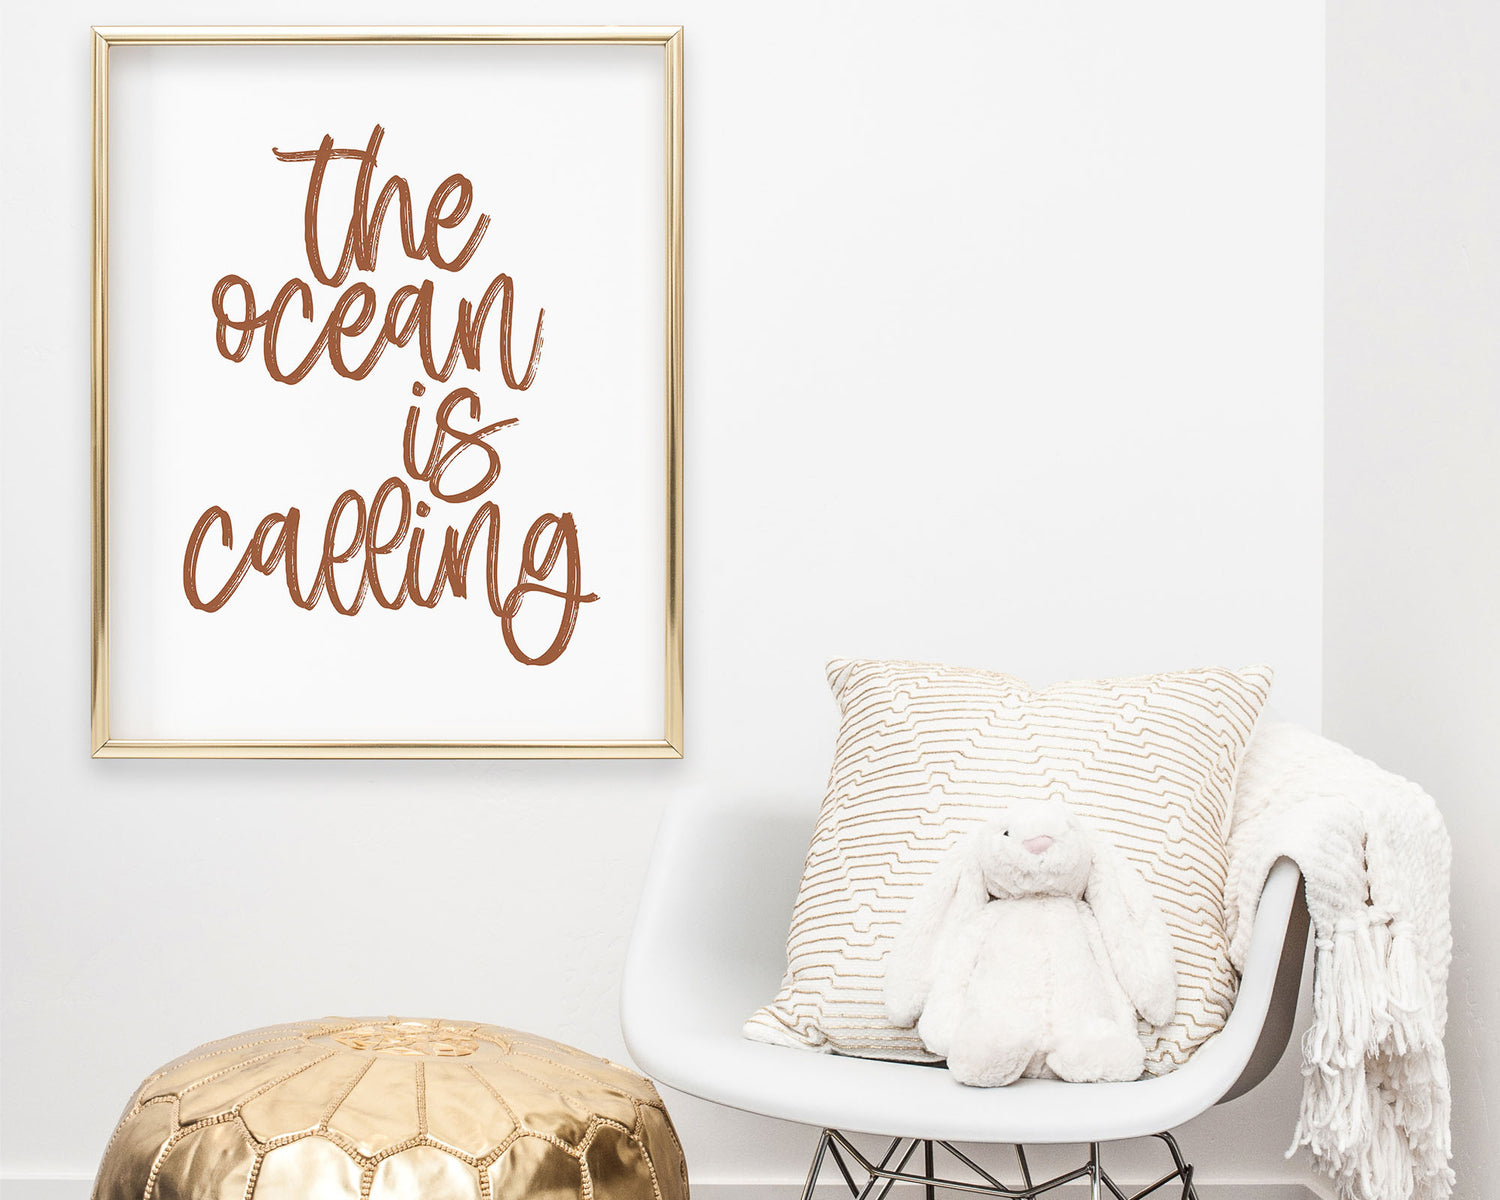 Rust Clay Terracotta earth tone colored The Ocean Is Calling Printable Wall Art featuring a textured brush style cursive lettered quote perfect for Baby Boy Nautical Nursery Decor, Baby Girl Surf Nursery Wall Art, Nautical Kids Bedroom Decor or Children's Coastal Wall Art.